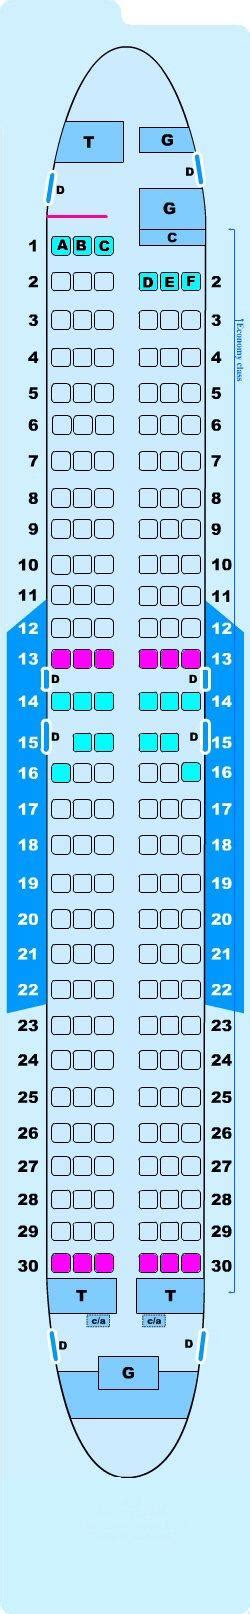 Boeing 737 800 Seating Map Boeing 737 800 Seat Map American Airlines